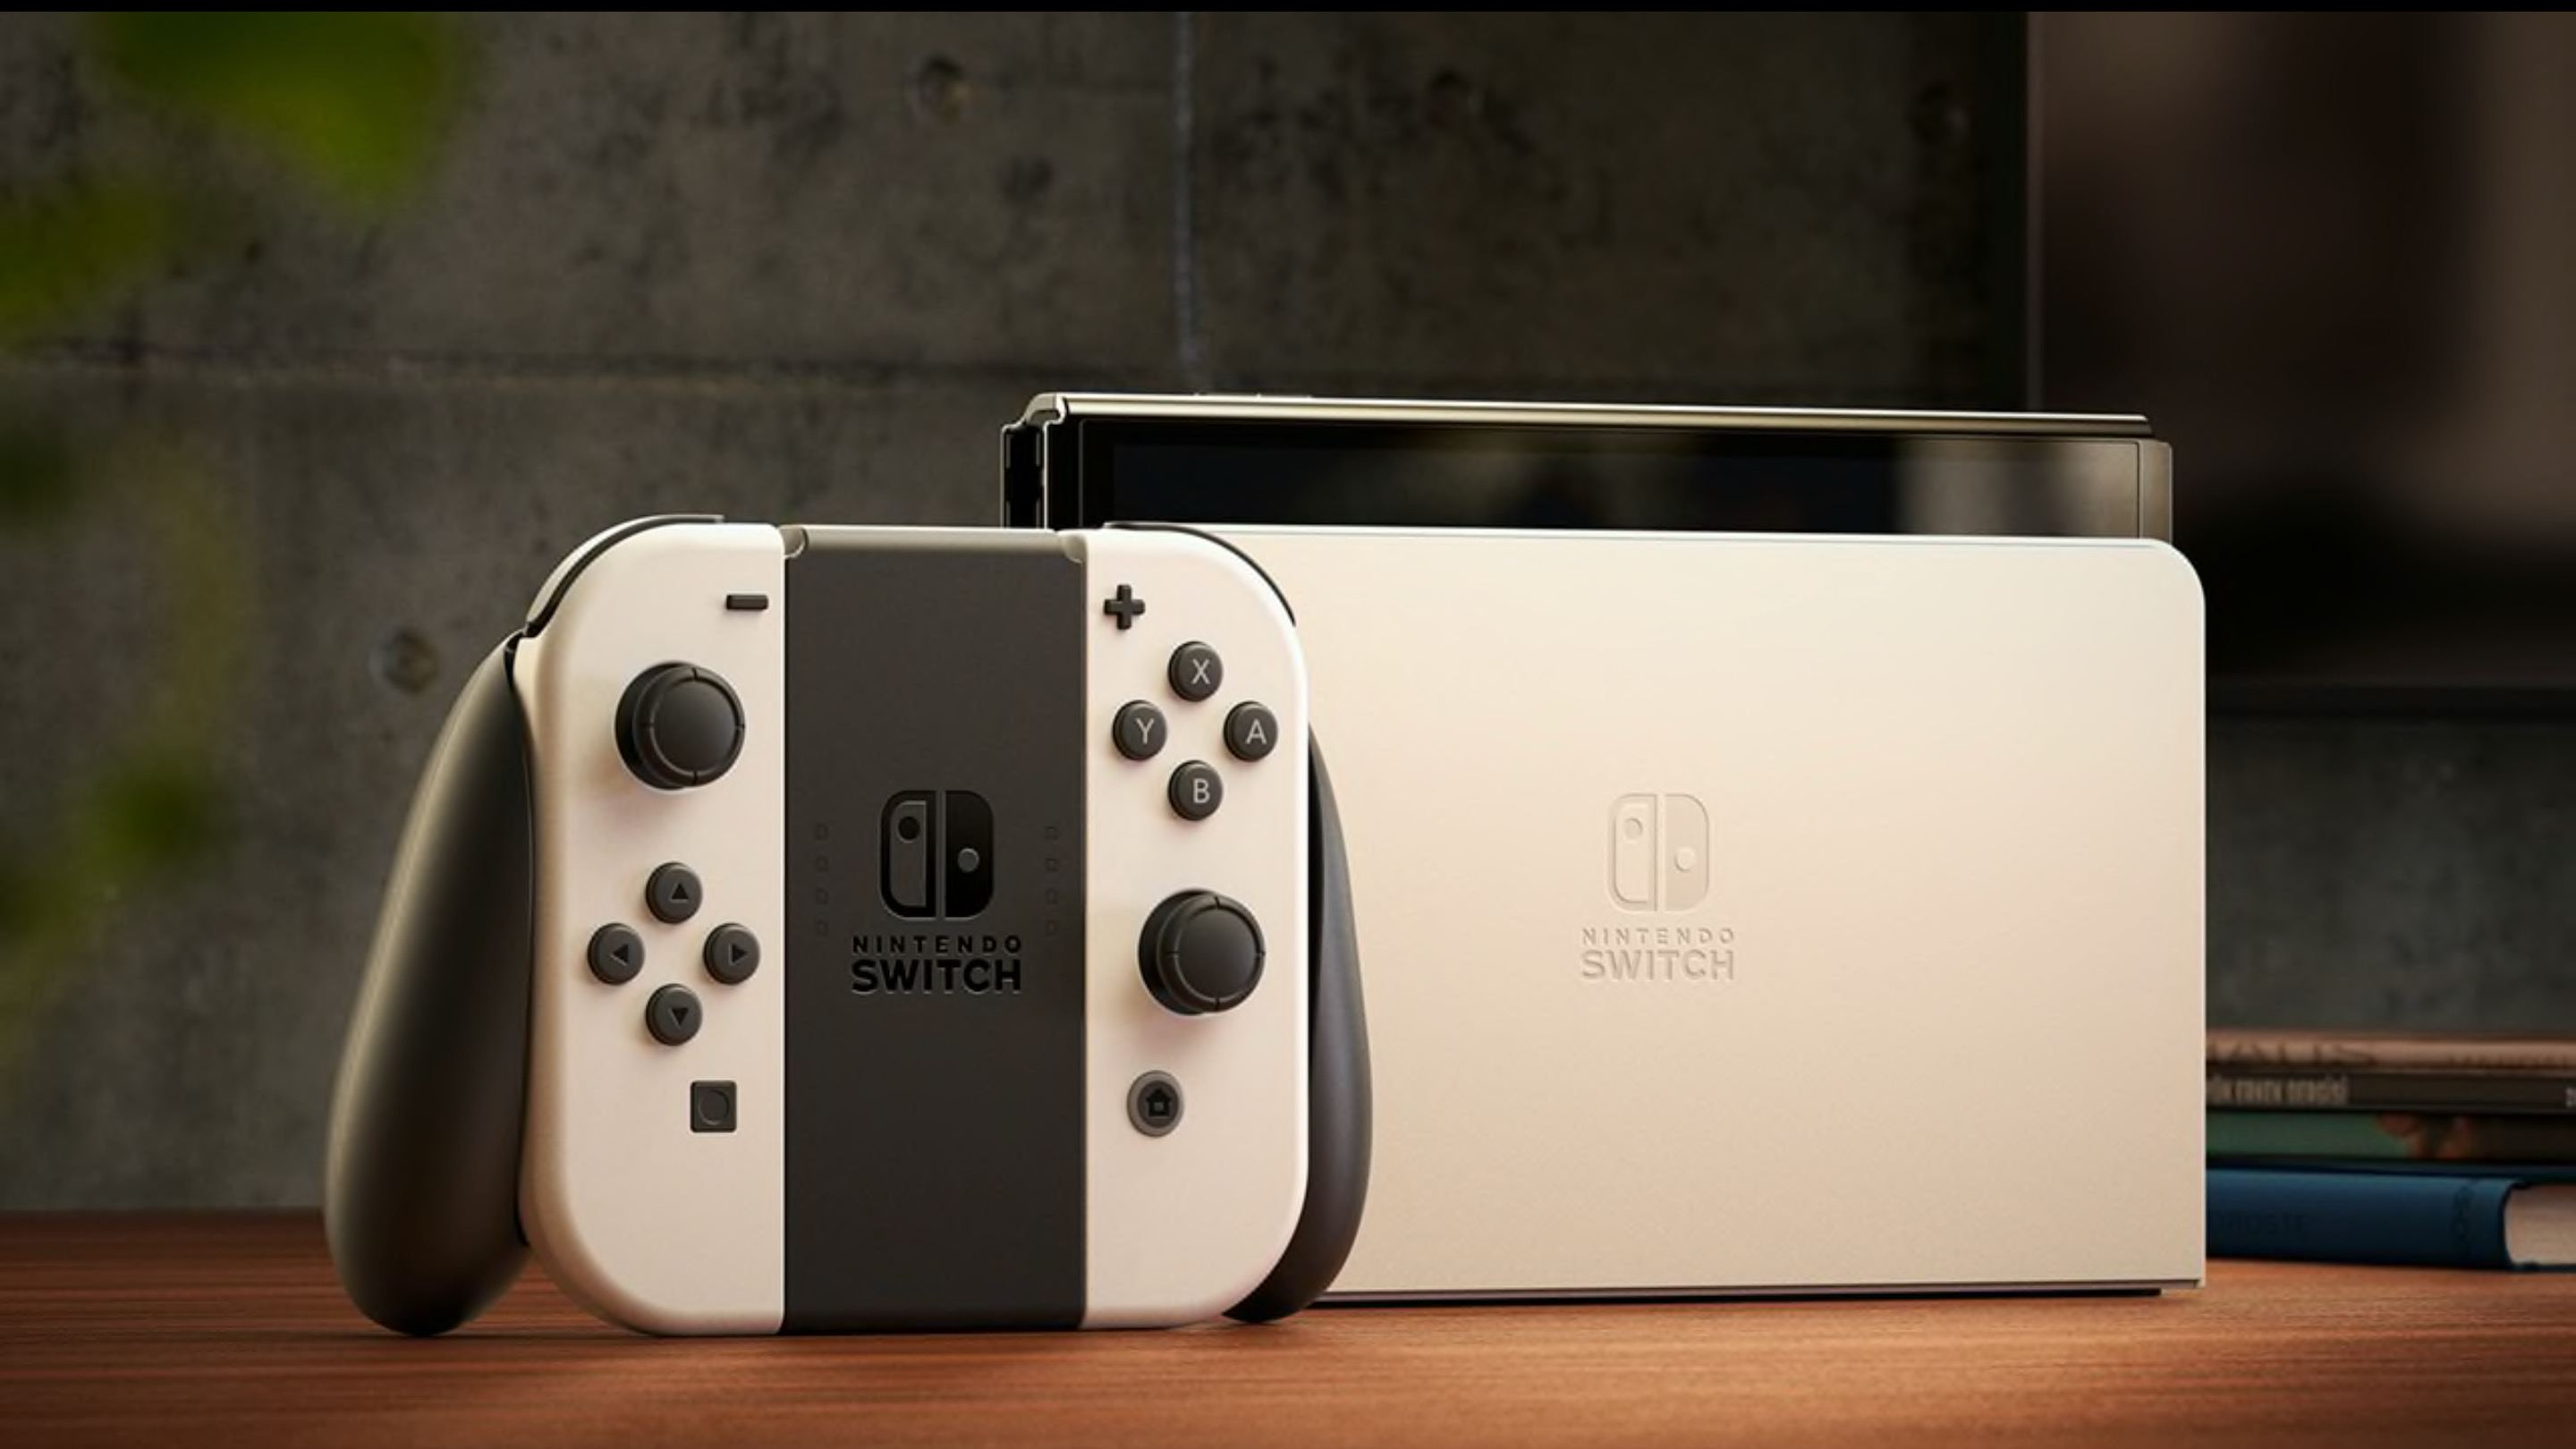 Nintendo Switch Has Now Sold Over 25 Million Units In Japan Alone